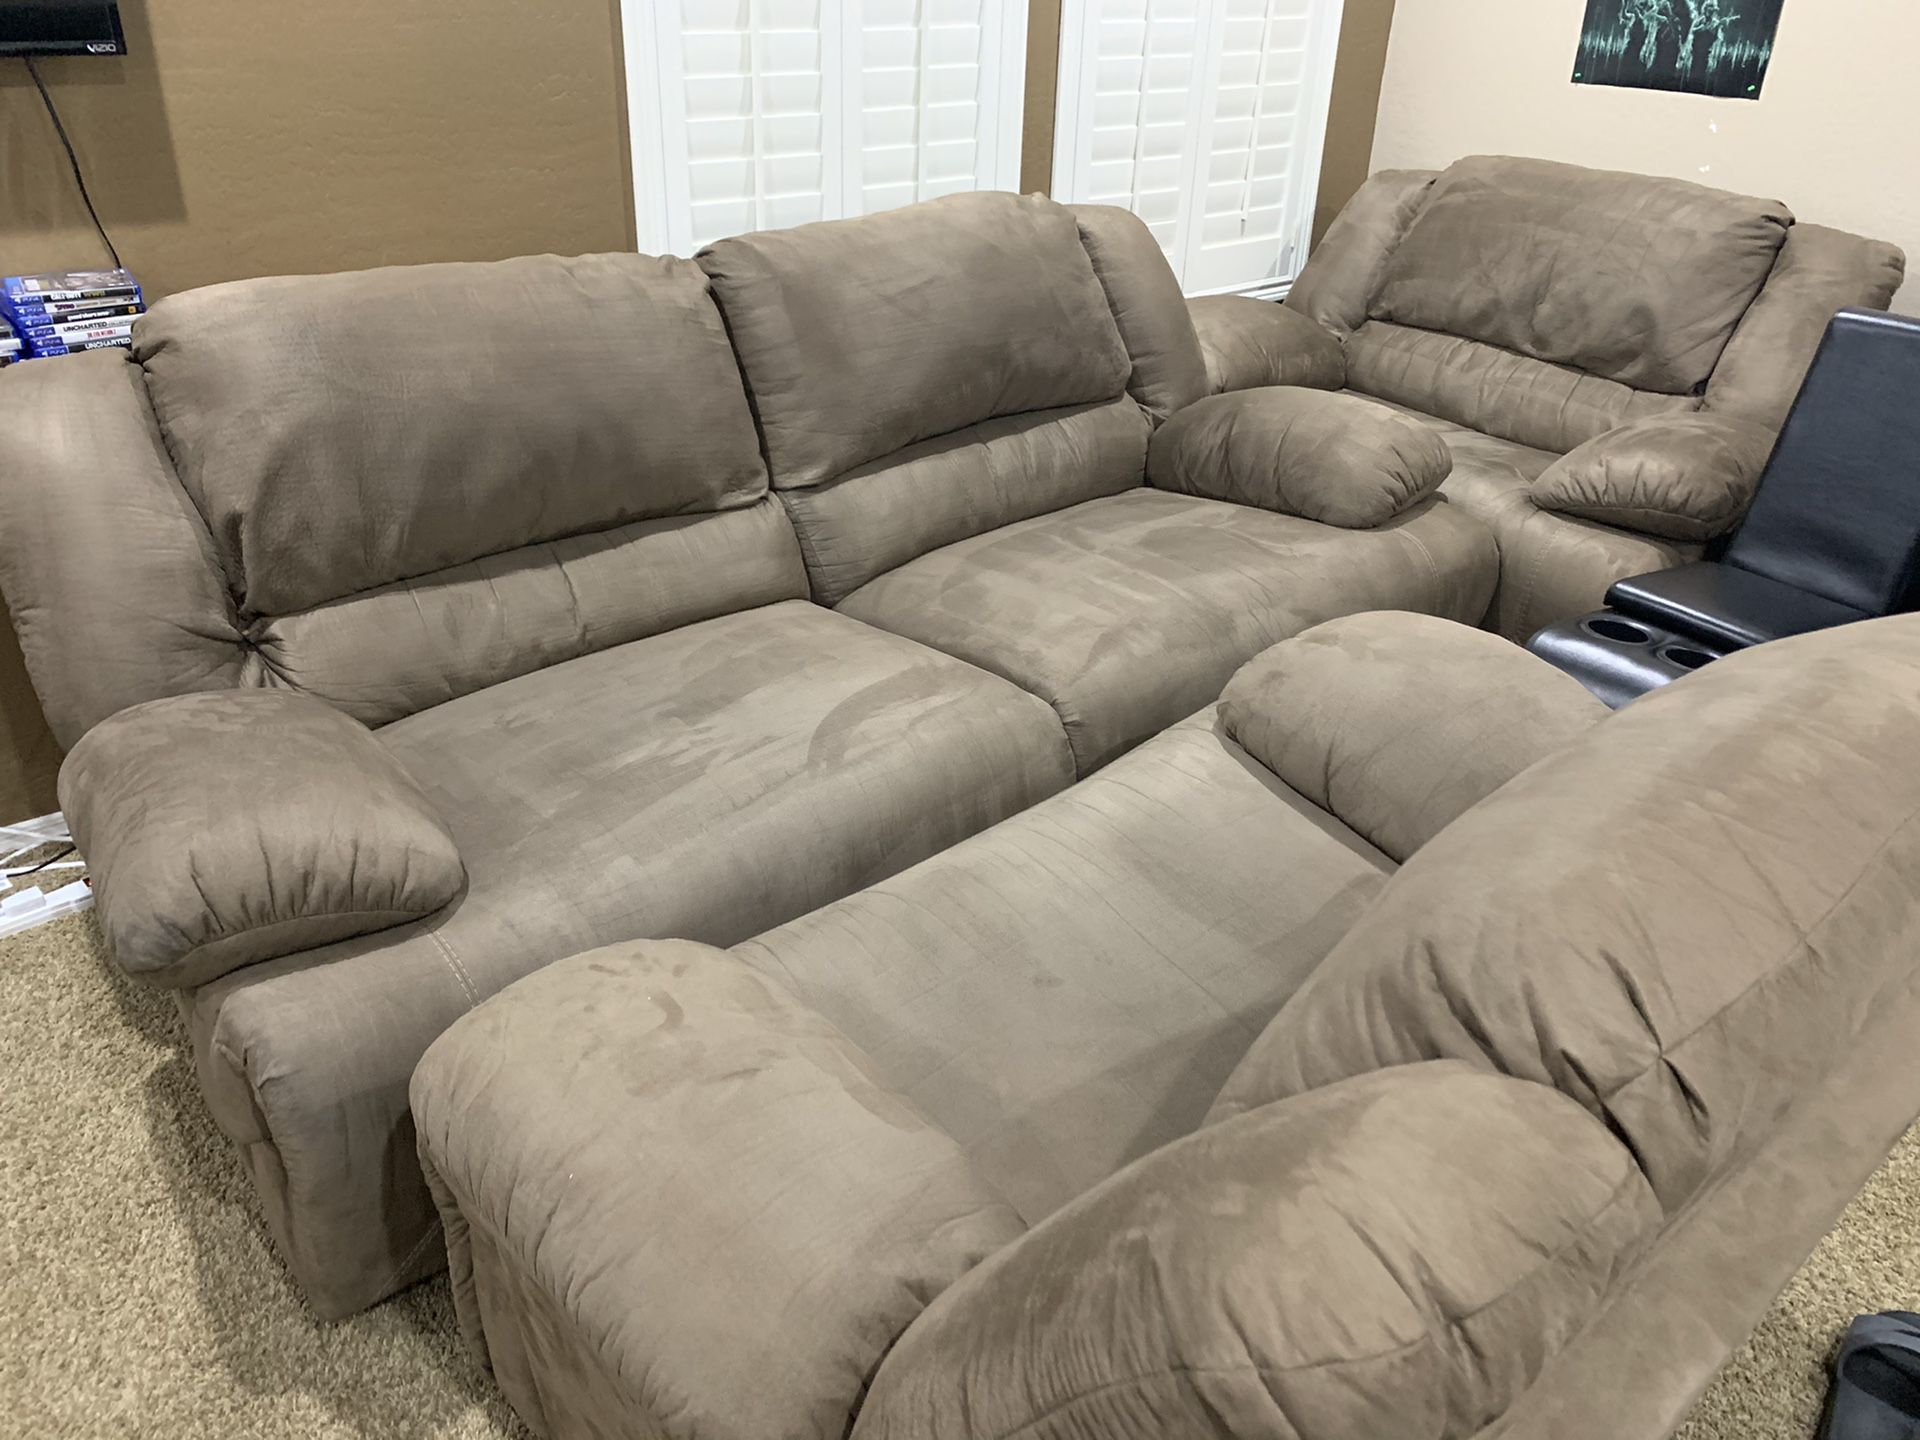 Sofa couch luv seat chair sectional leather